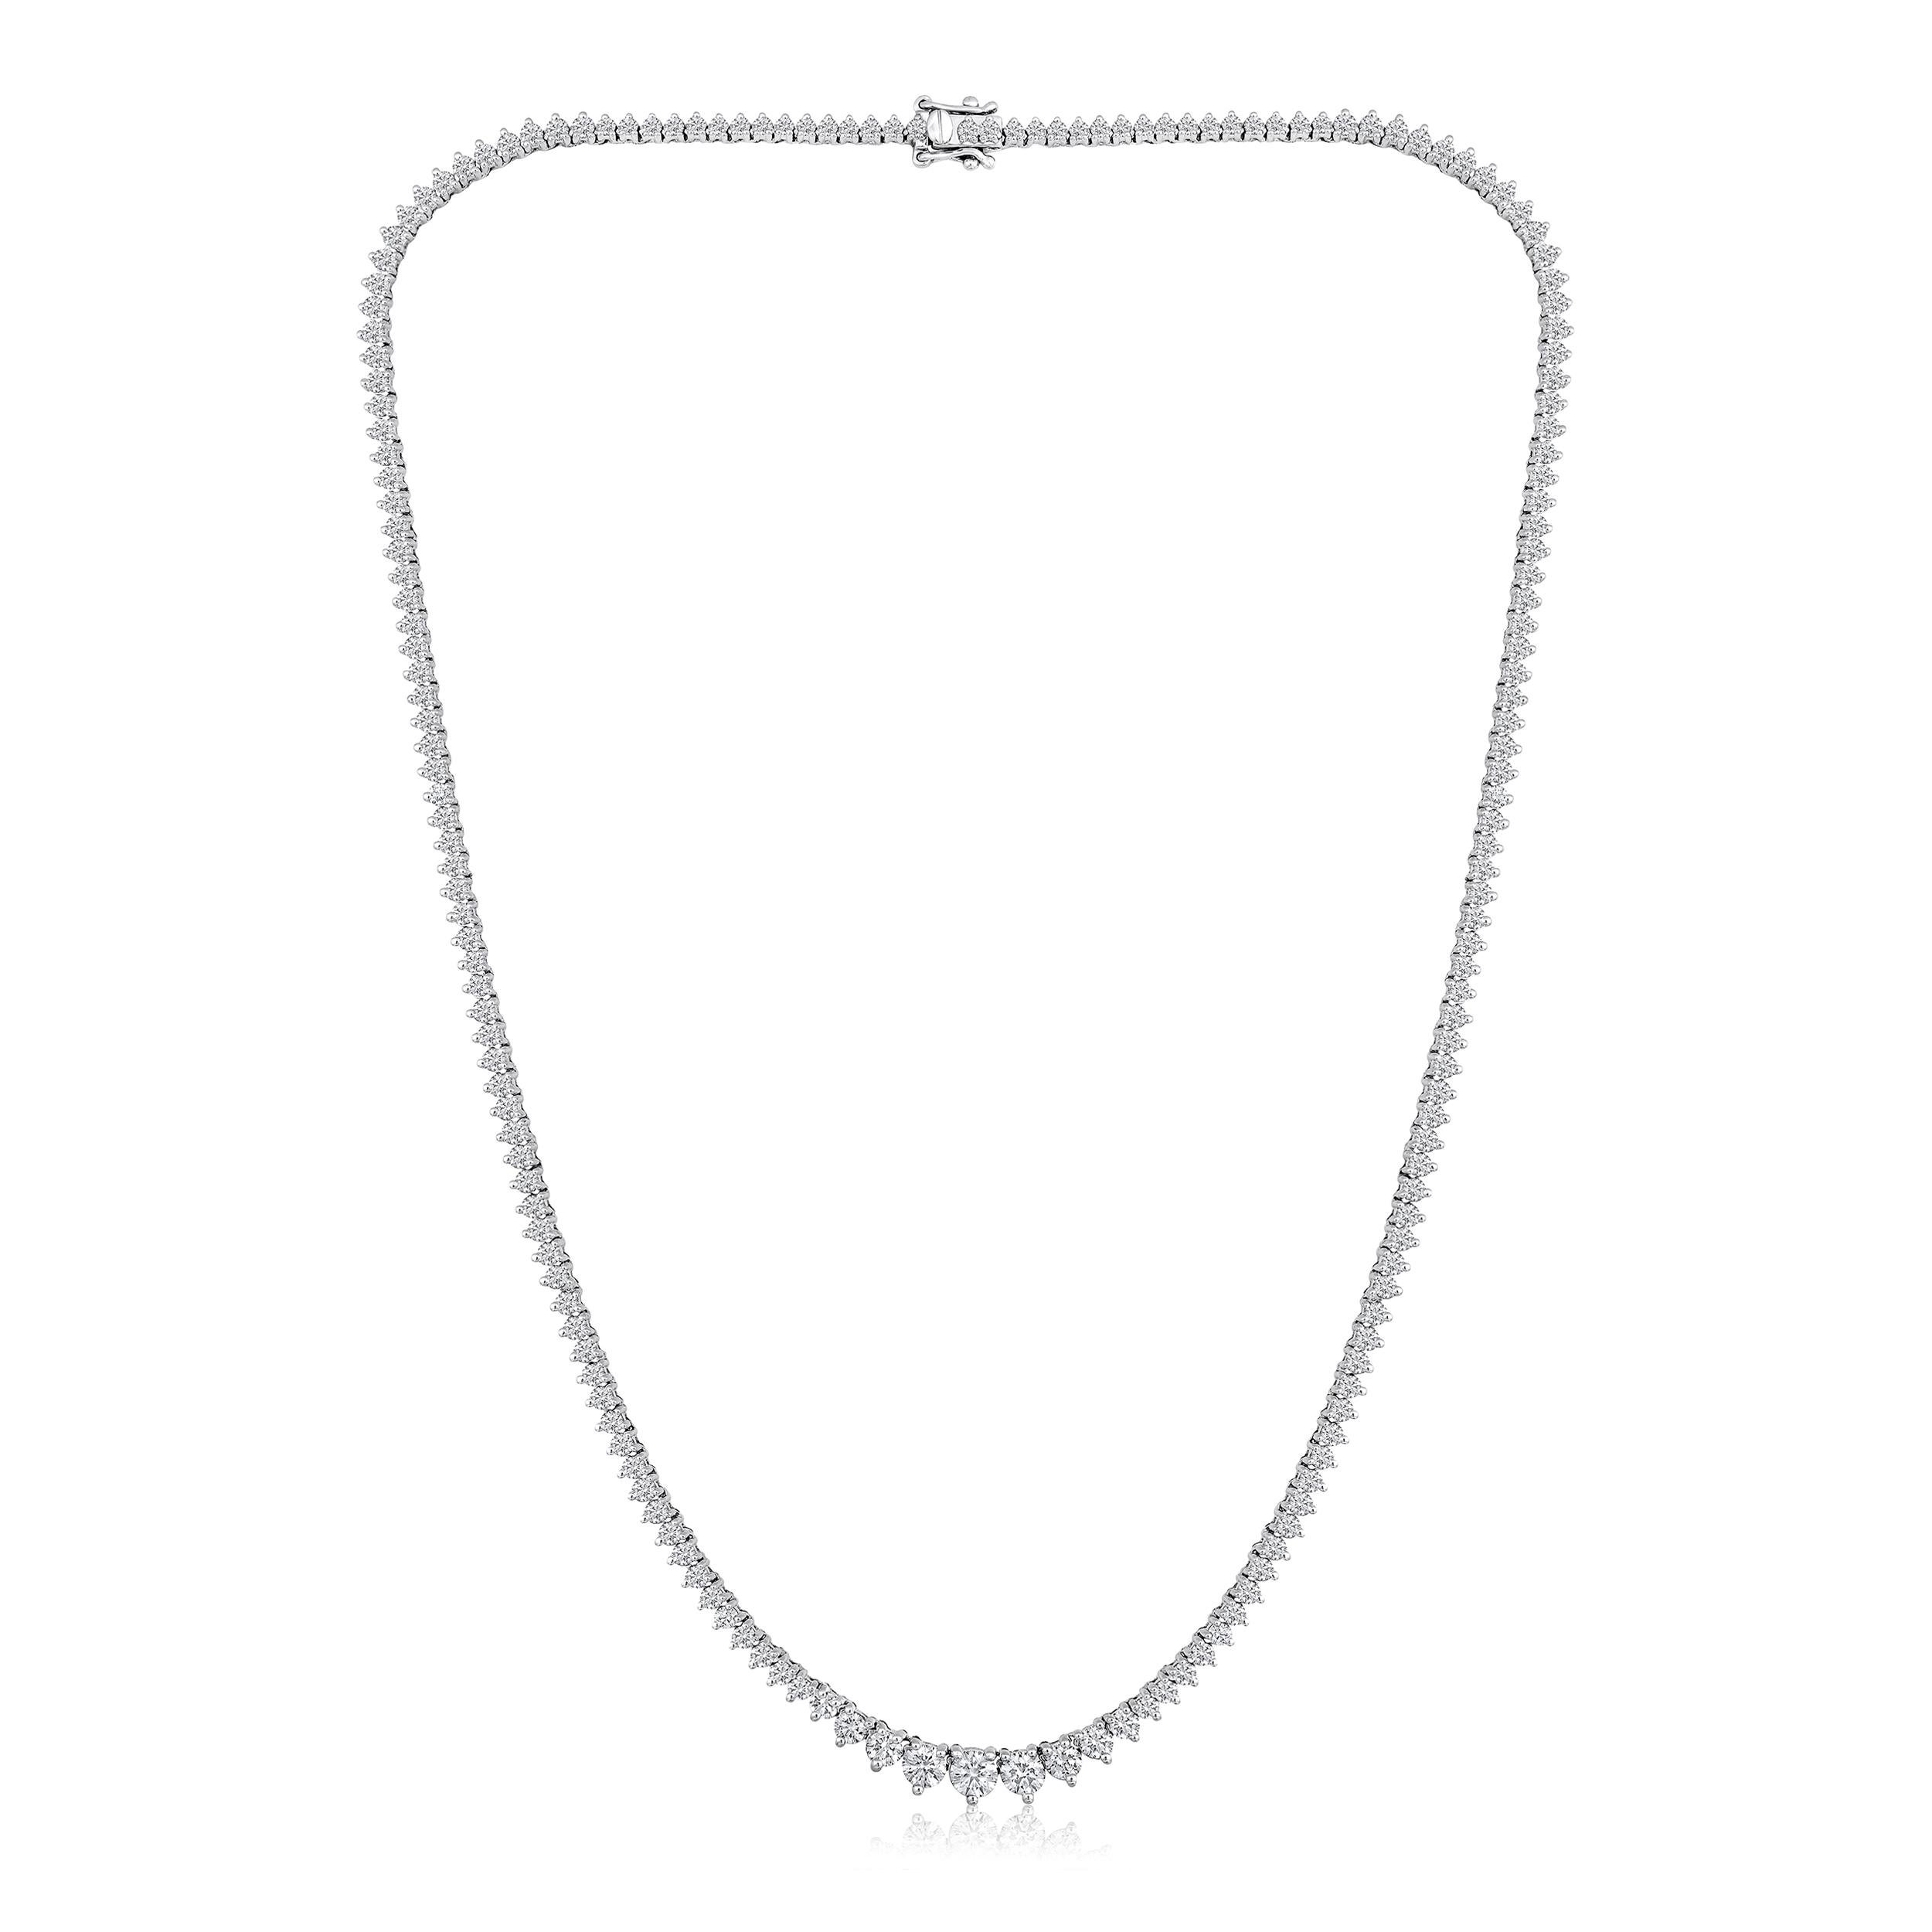 Crafted in 15.82 grams of 14K White Gold, the necklace contains 186 stones of Round Diamonds with a total of 6.05 carat in F-G color and VS-SI carat. The necklace length is 16 inches.

This jewelry piece will be expertly crafted by our skilled